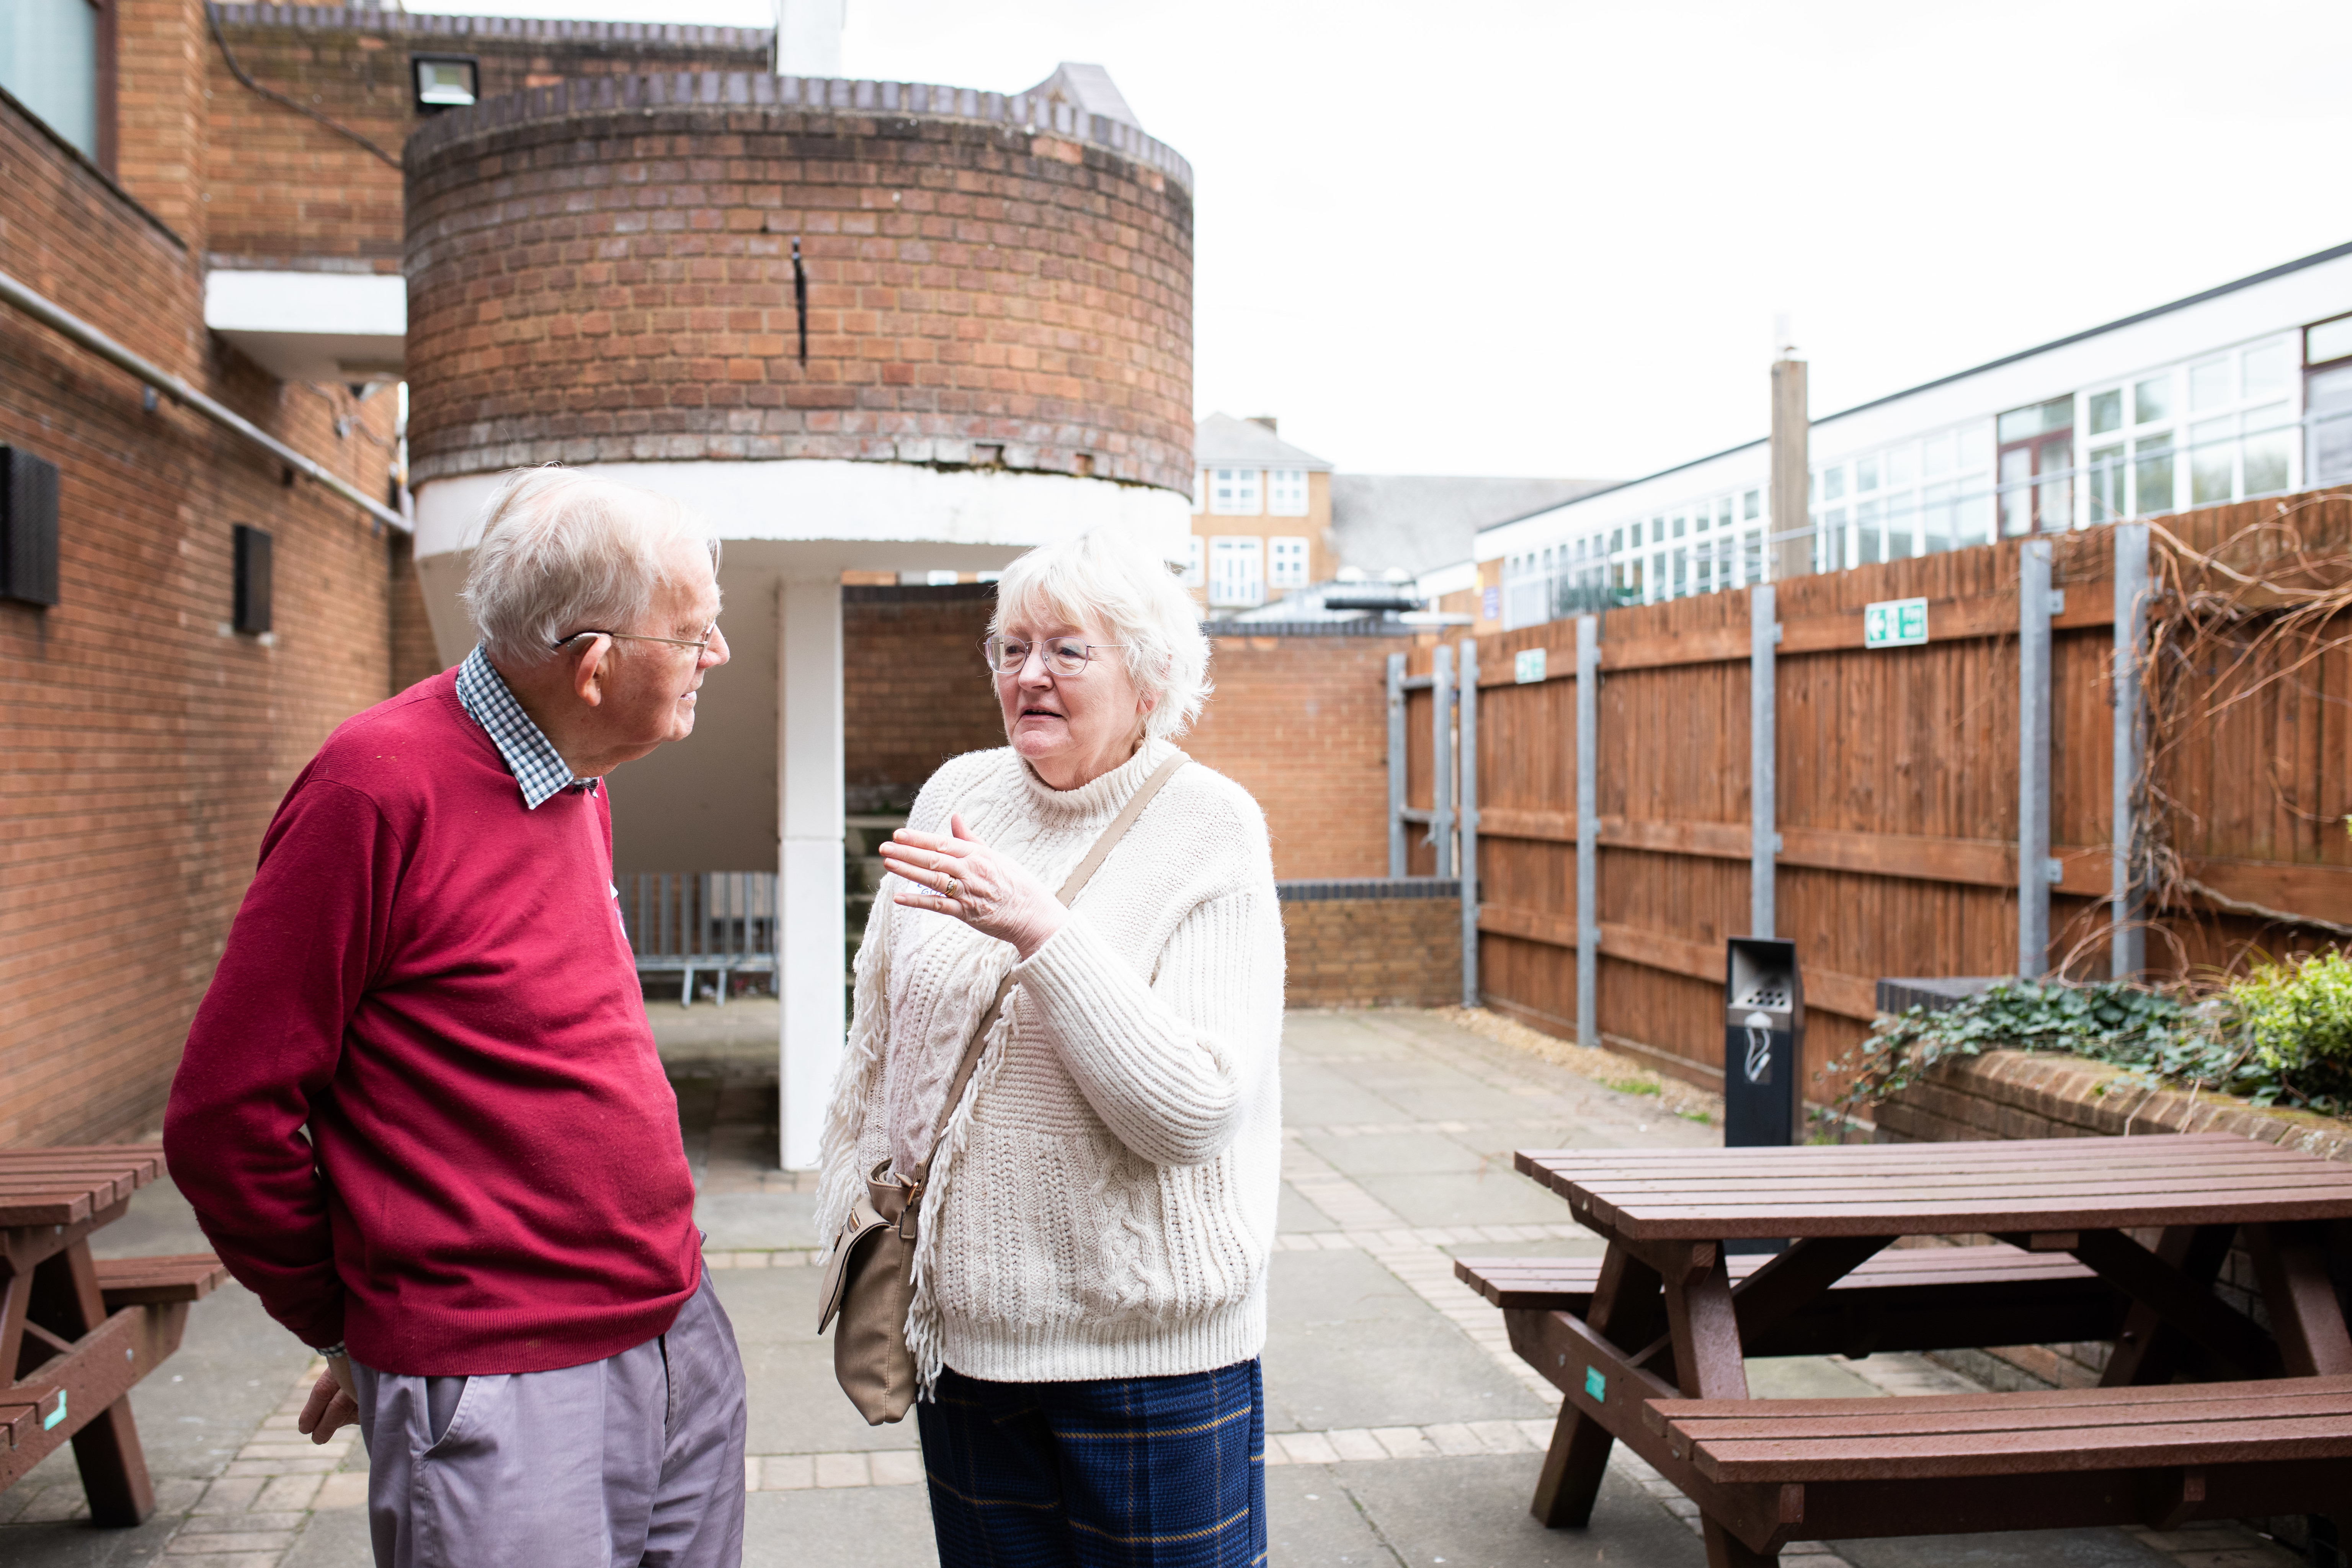 An older man and woman standing in a courtyard with a picnic table in the background. They are talking to each other